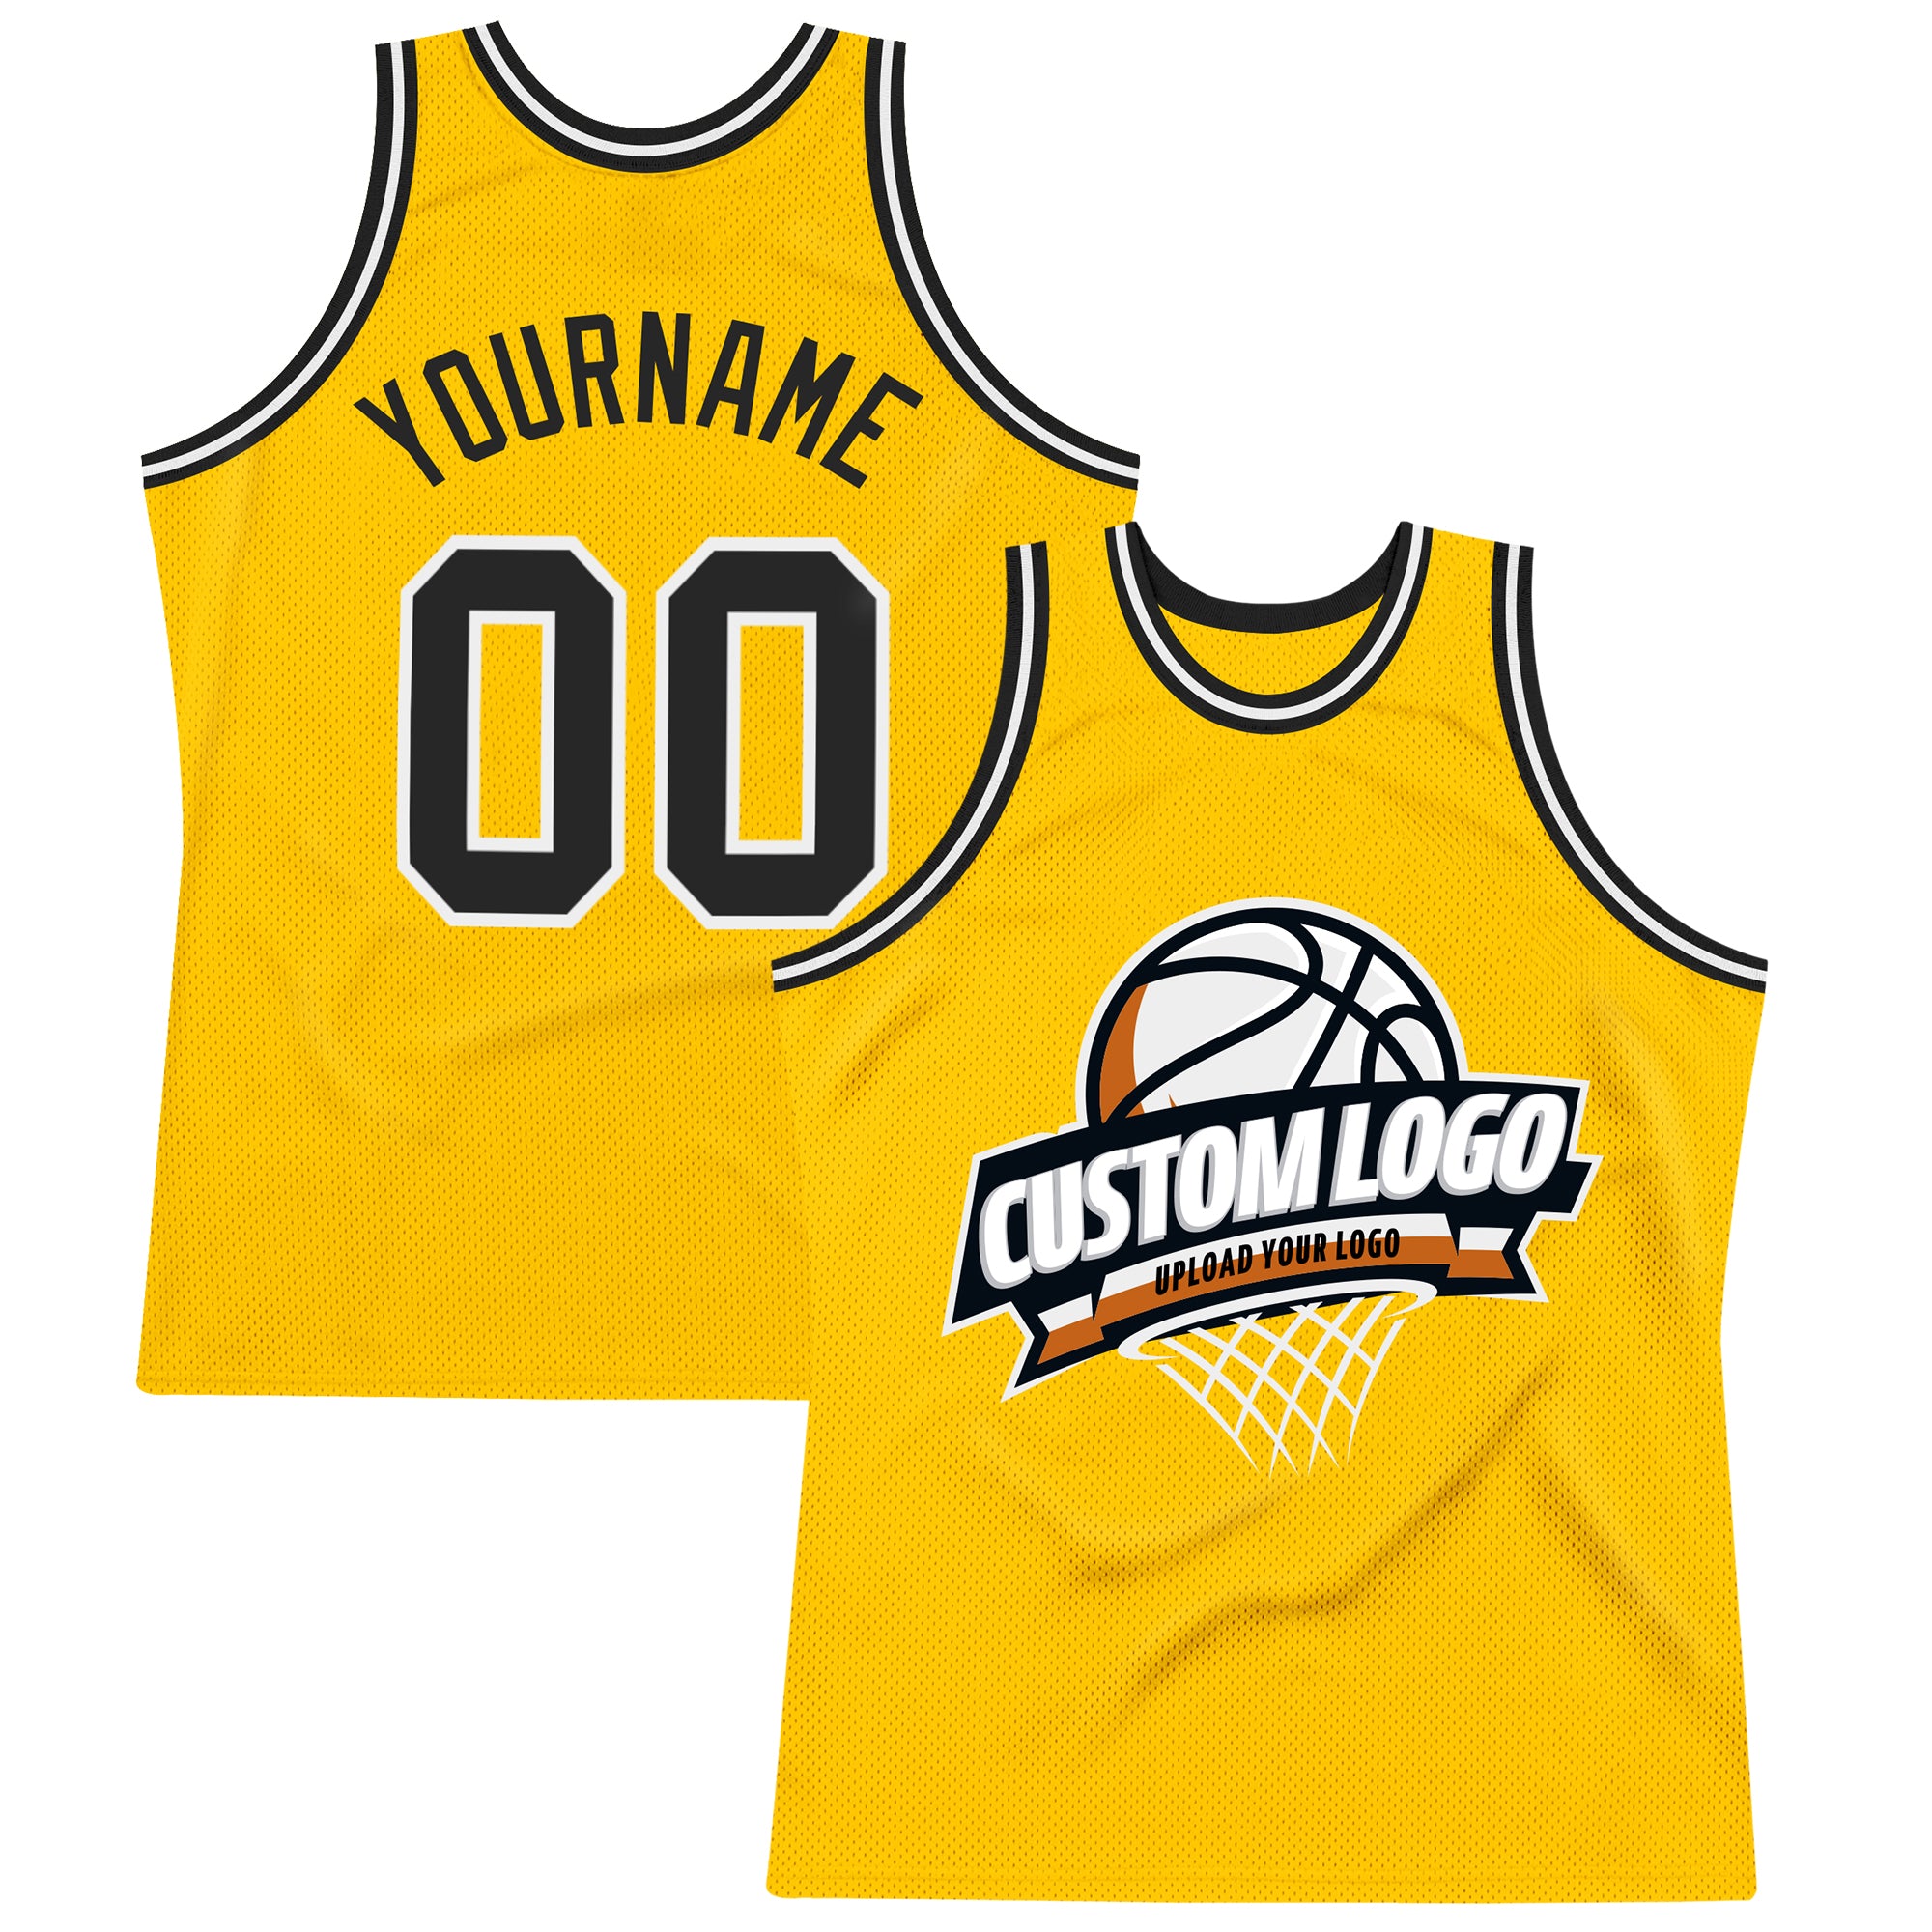 GSW 23 BASKETBALL JERSEY FREE CUSTOMIZE OF NAME AND NUMBER ONLY full  sublimation high quality fabrics jersey/ trending jersey